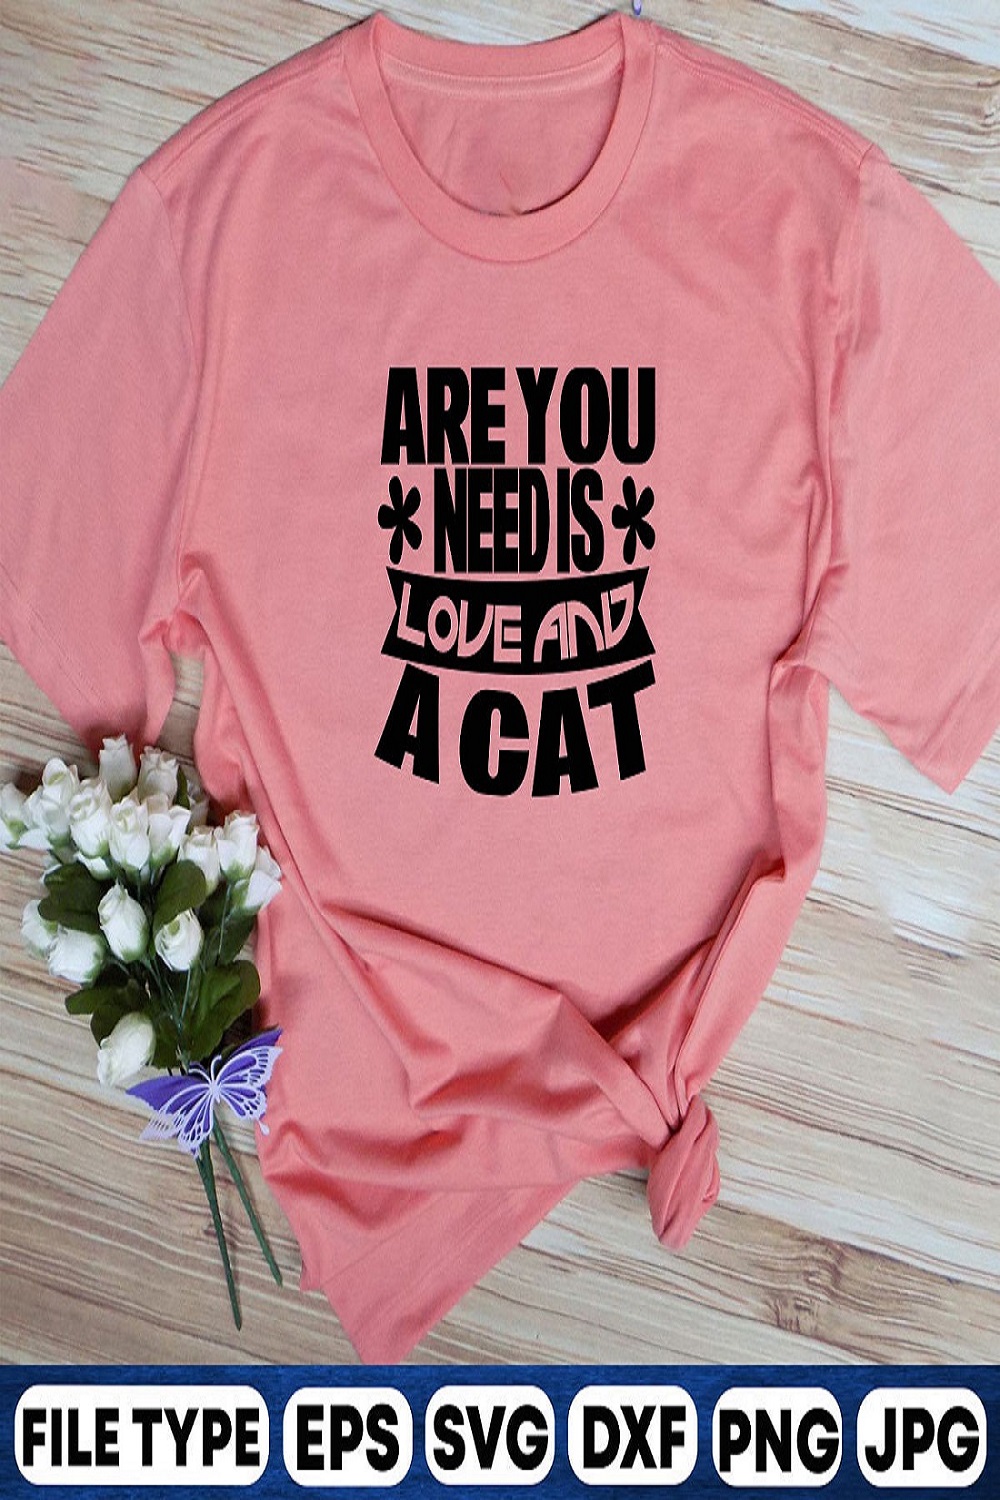 Are you need is love and a cat pinterest preview image.